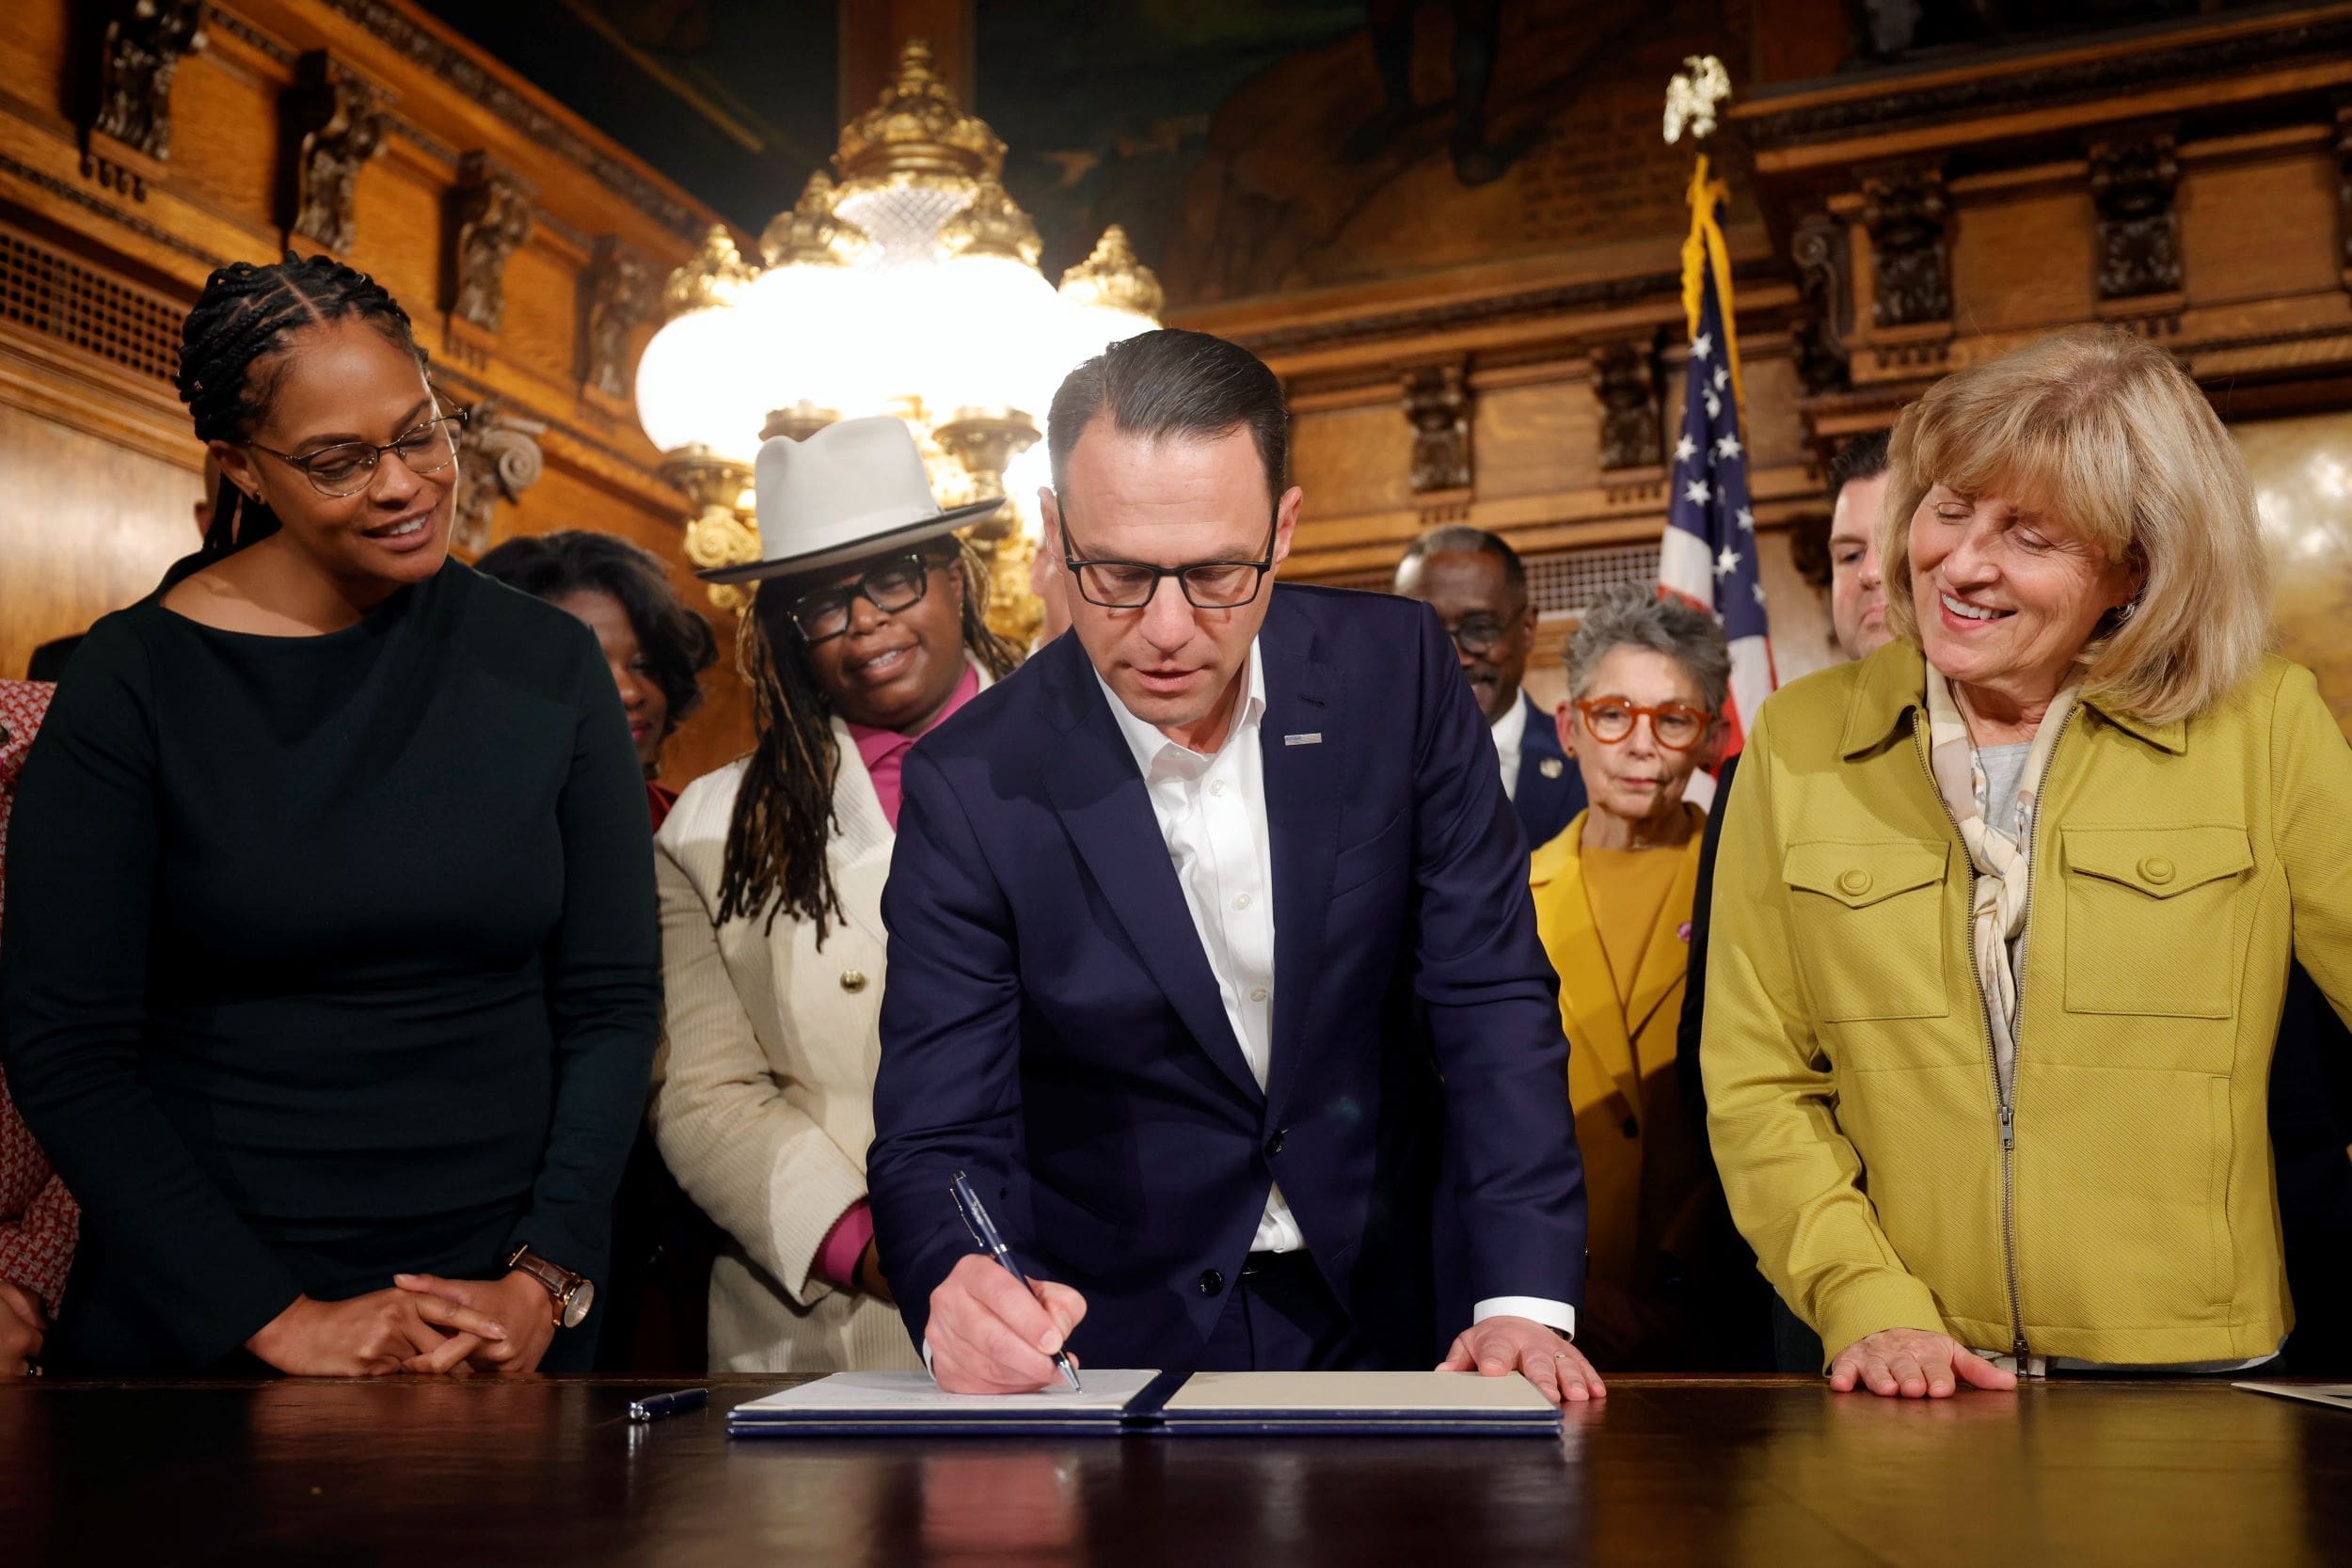 Gov. Josh Shapiro joins lawmakers for a ceremonial signing of legislation meant to reduce maternal morbidity and mortality rates in Pennsylvania.